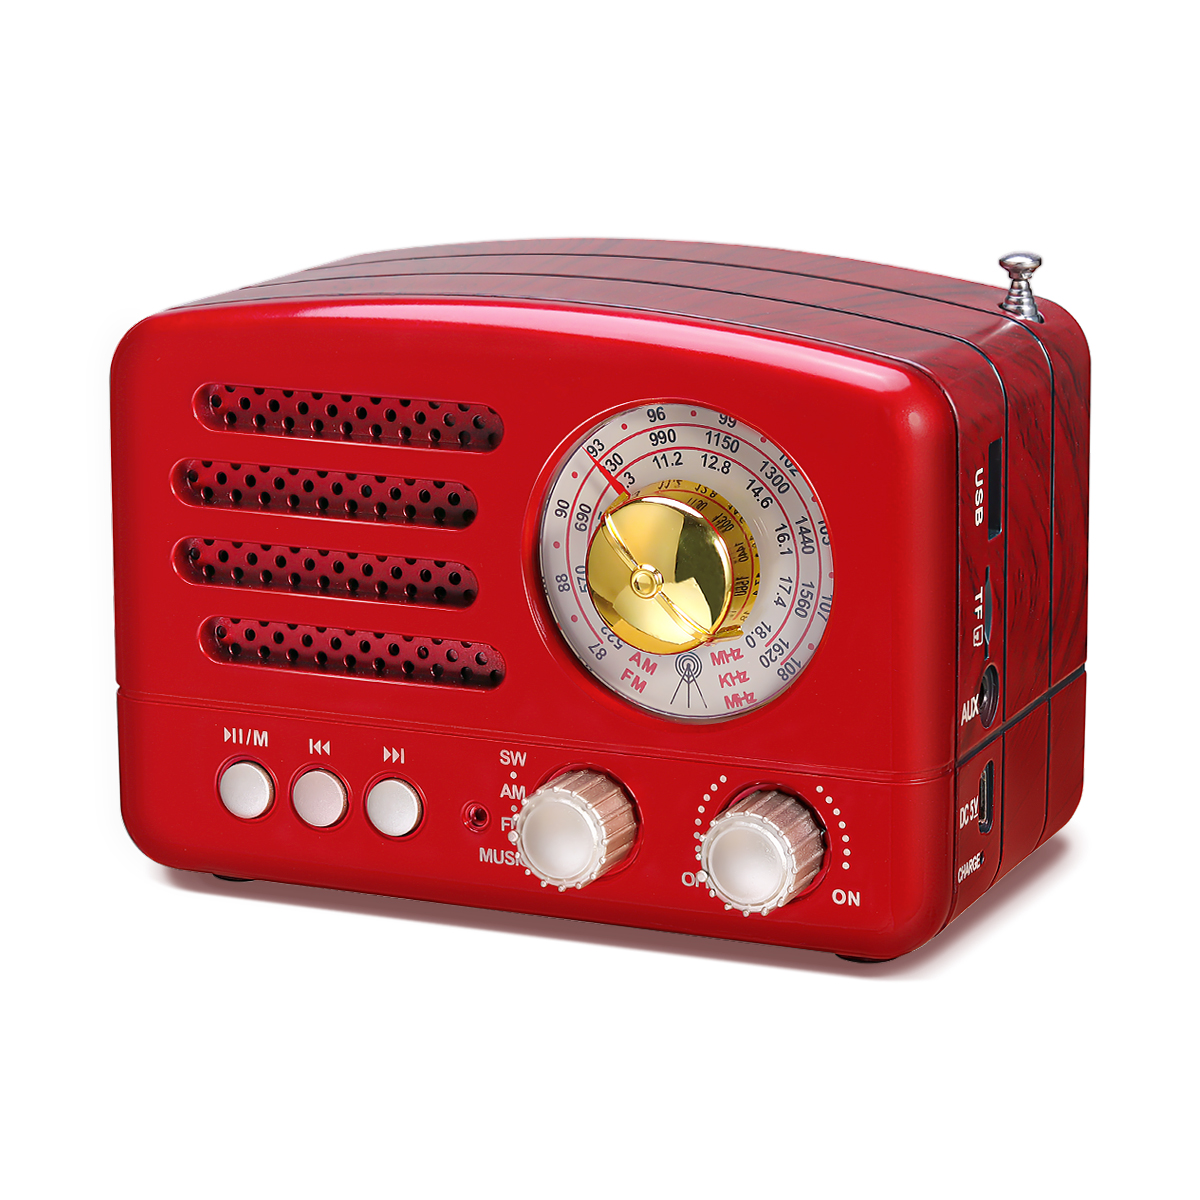 PRUNUS J-160 Portable Retro Radio Transistor with Bluetooth Speaker, FM SW Small Radio 1800mAh Rechargeable Battery Operated,Supports TF Card/AUX/USB